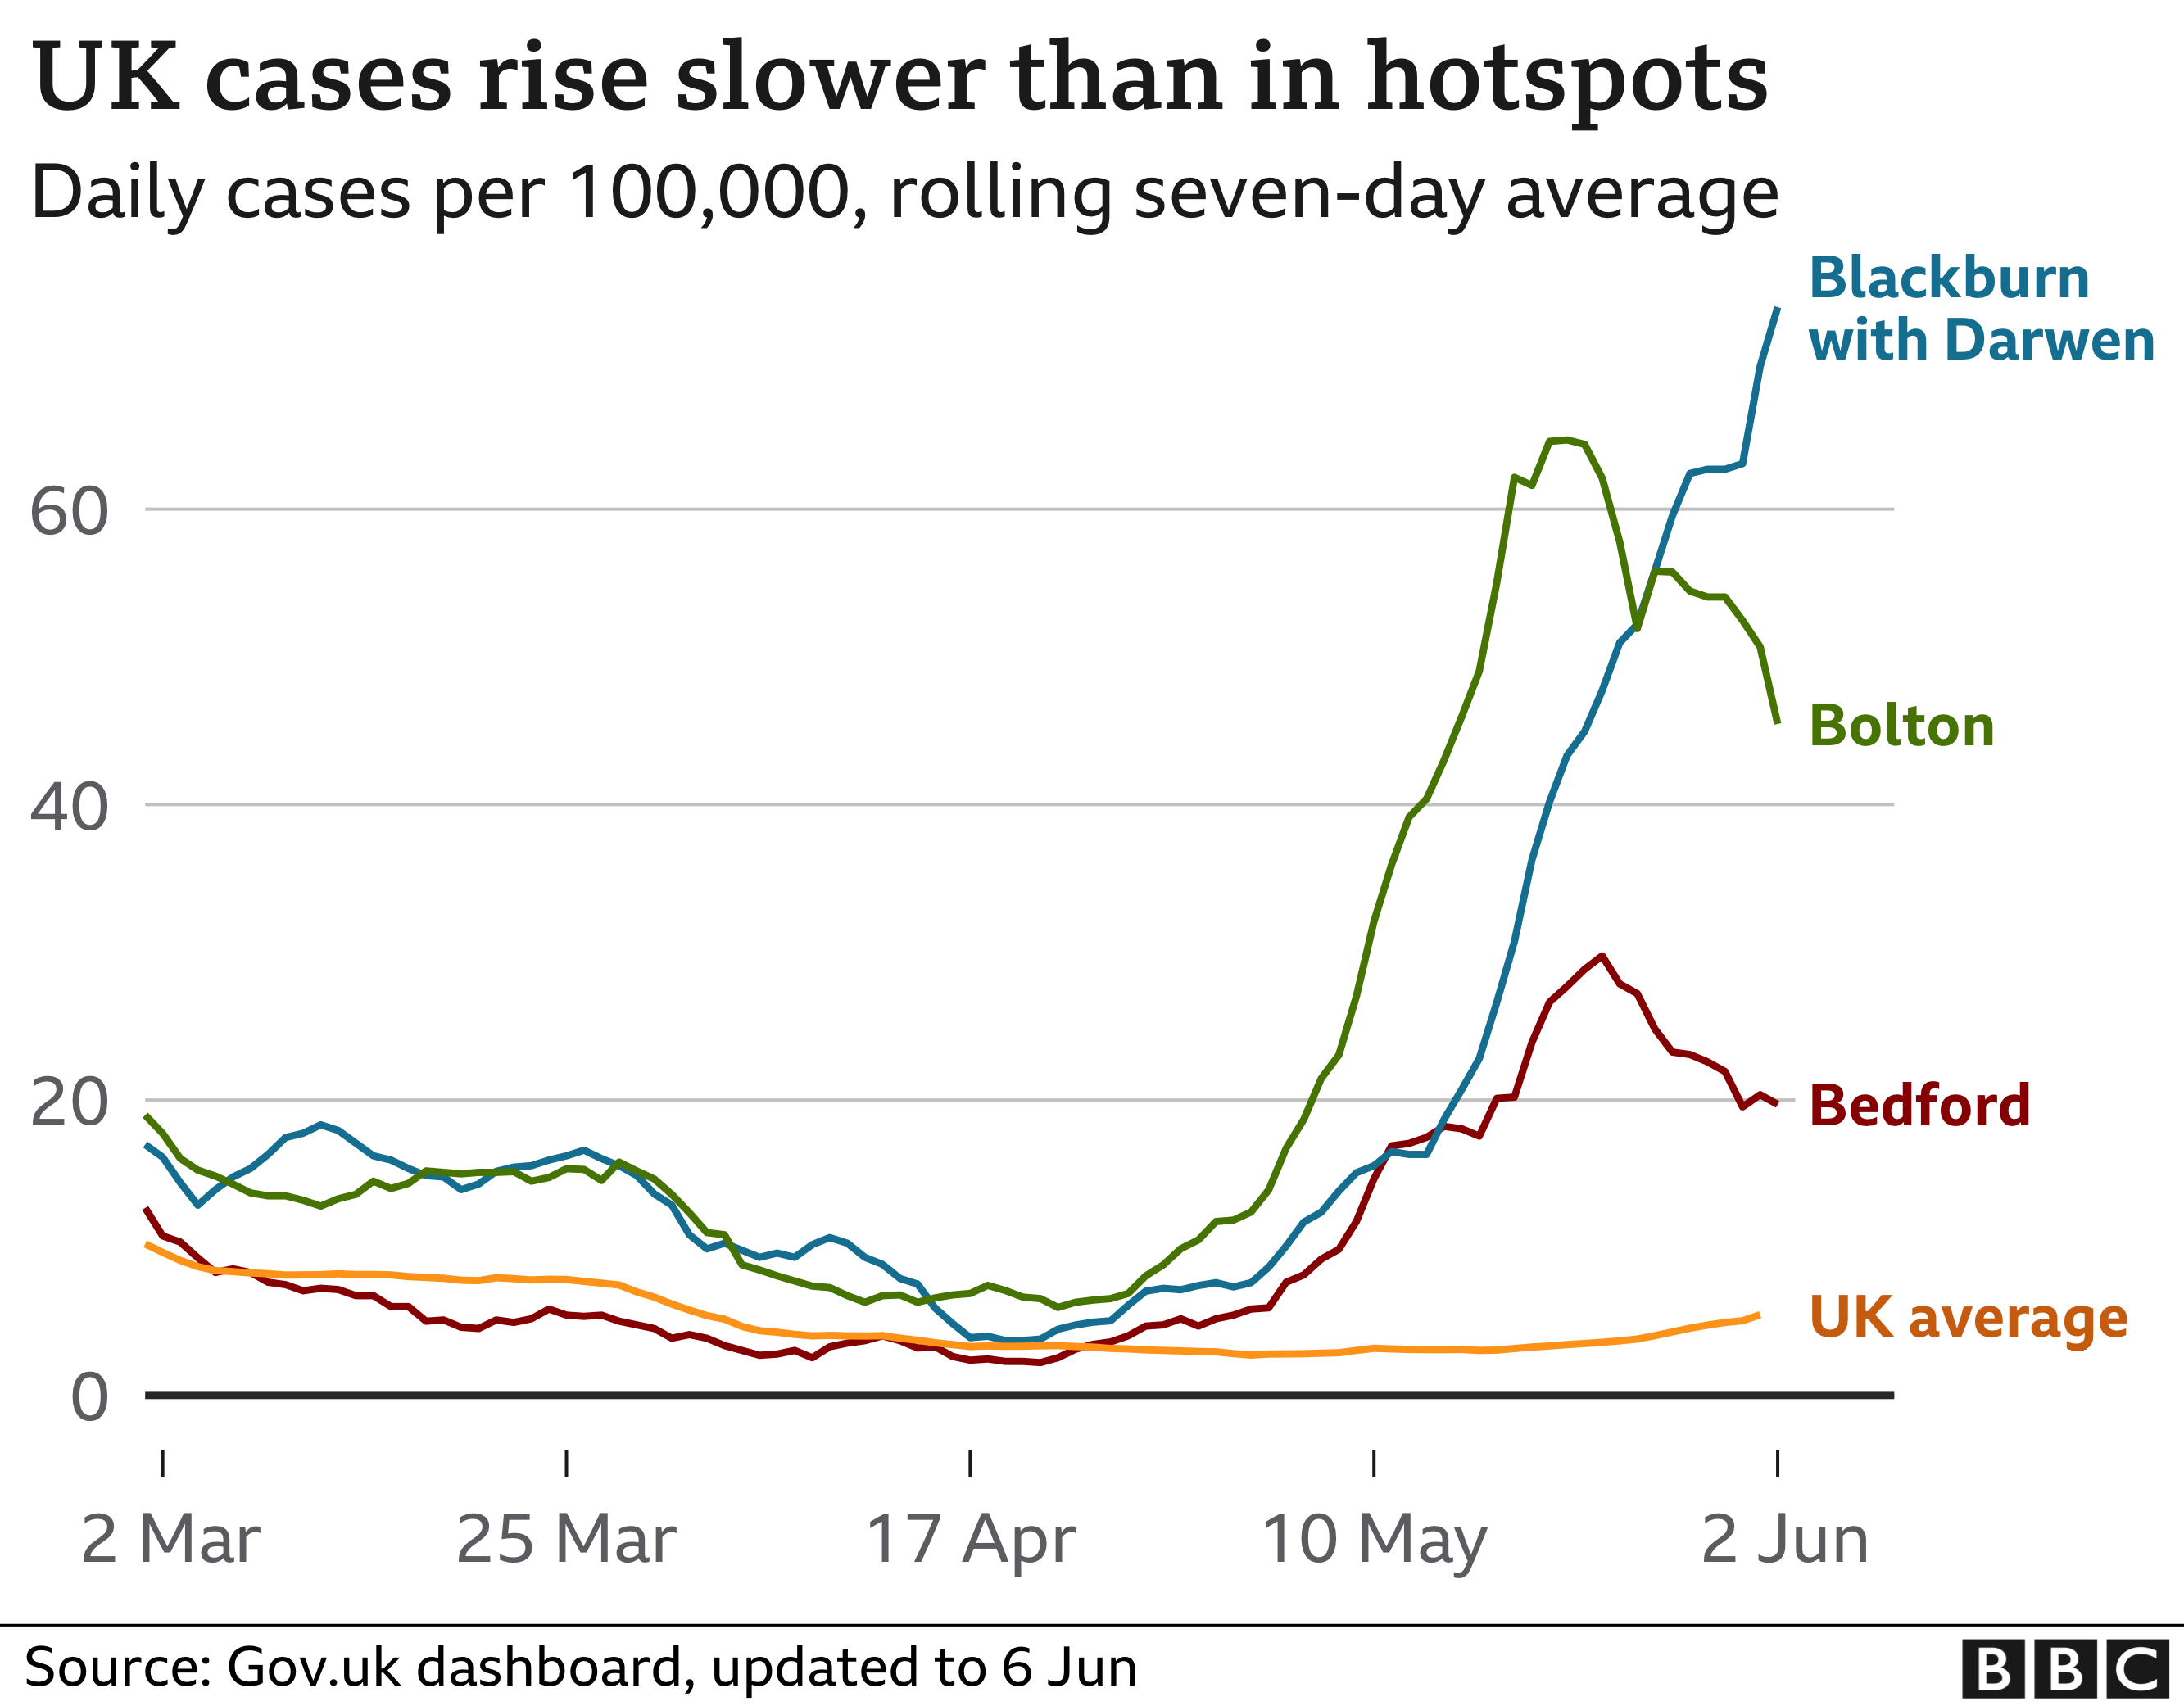 chart: big rise in cases in a few hotspots including blackburn, bolton and bedford drive up uk cases overall slightly